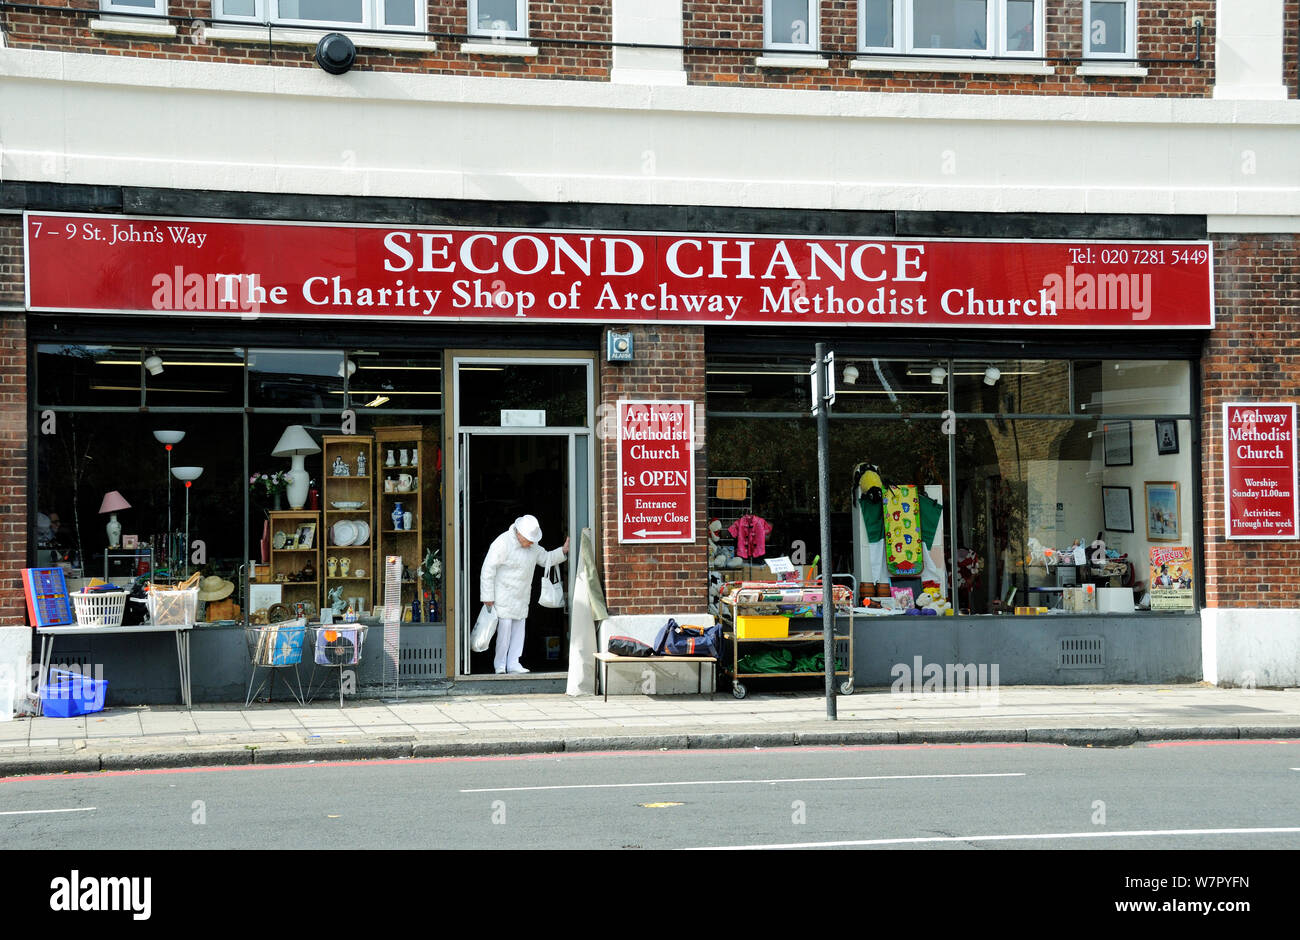 Lady leaving Second Chance, The Charity Shop for Archway Methodist Church, London Borough of Islington, England, UK, September 2010 Stock Photo